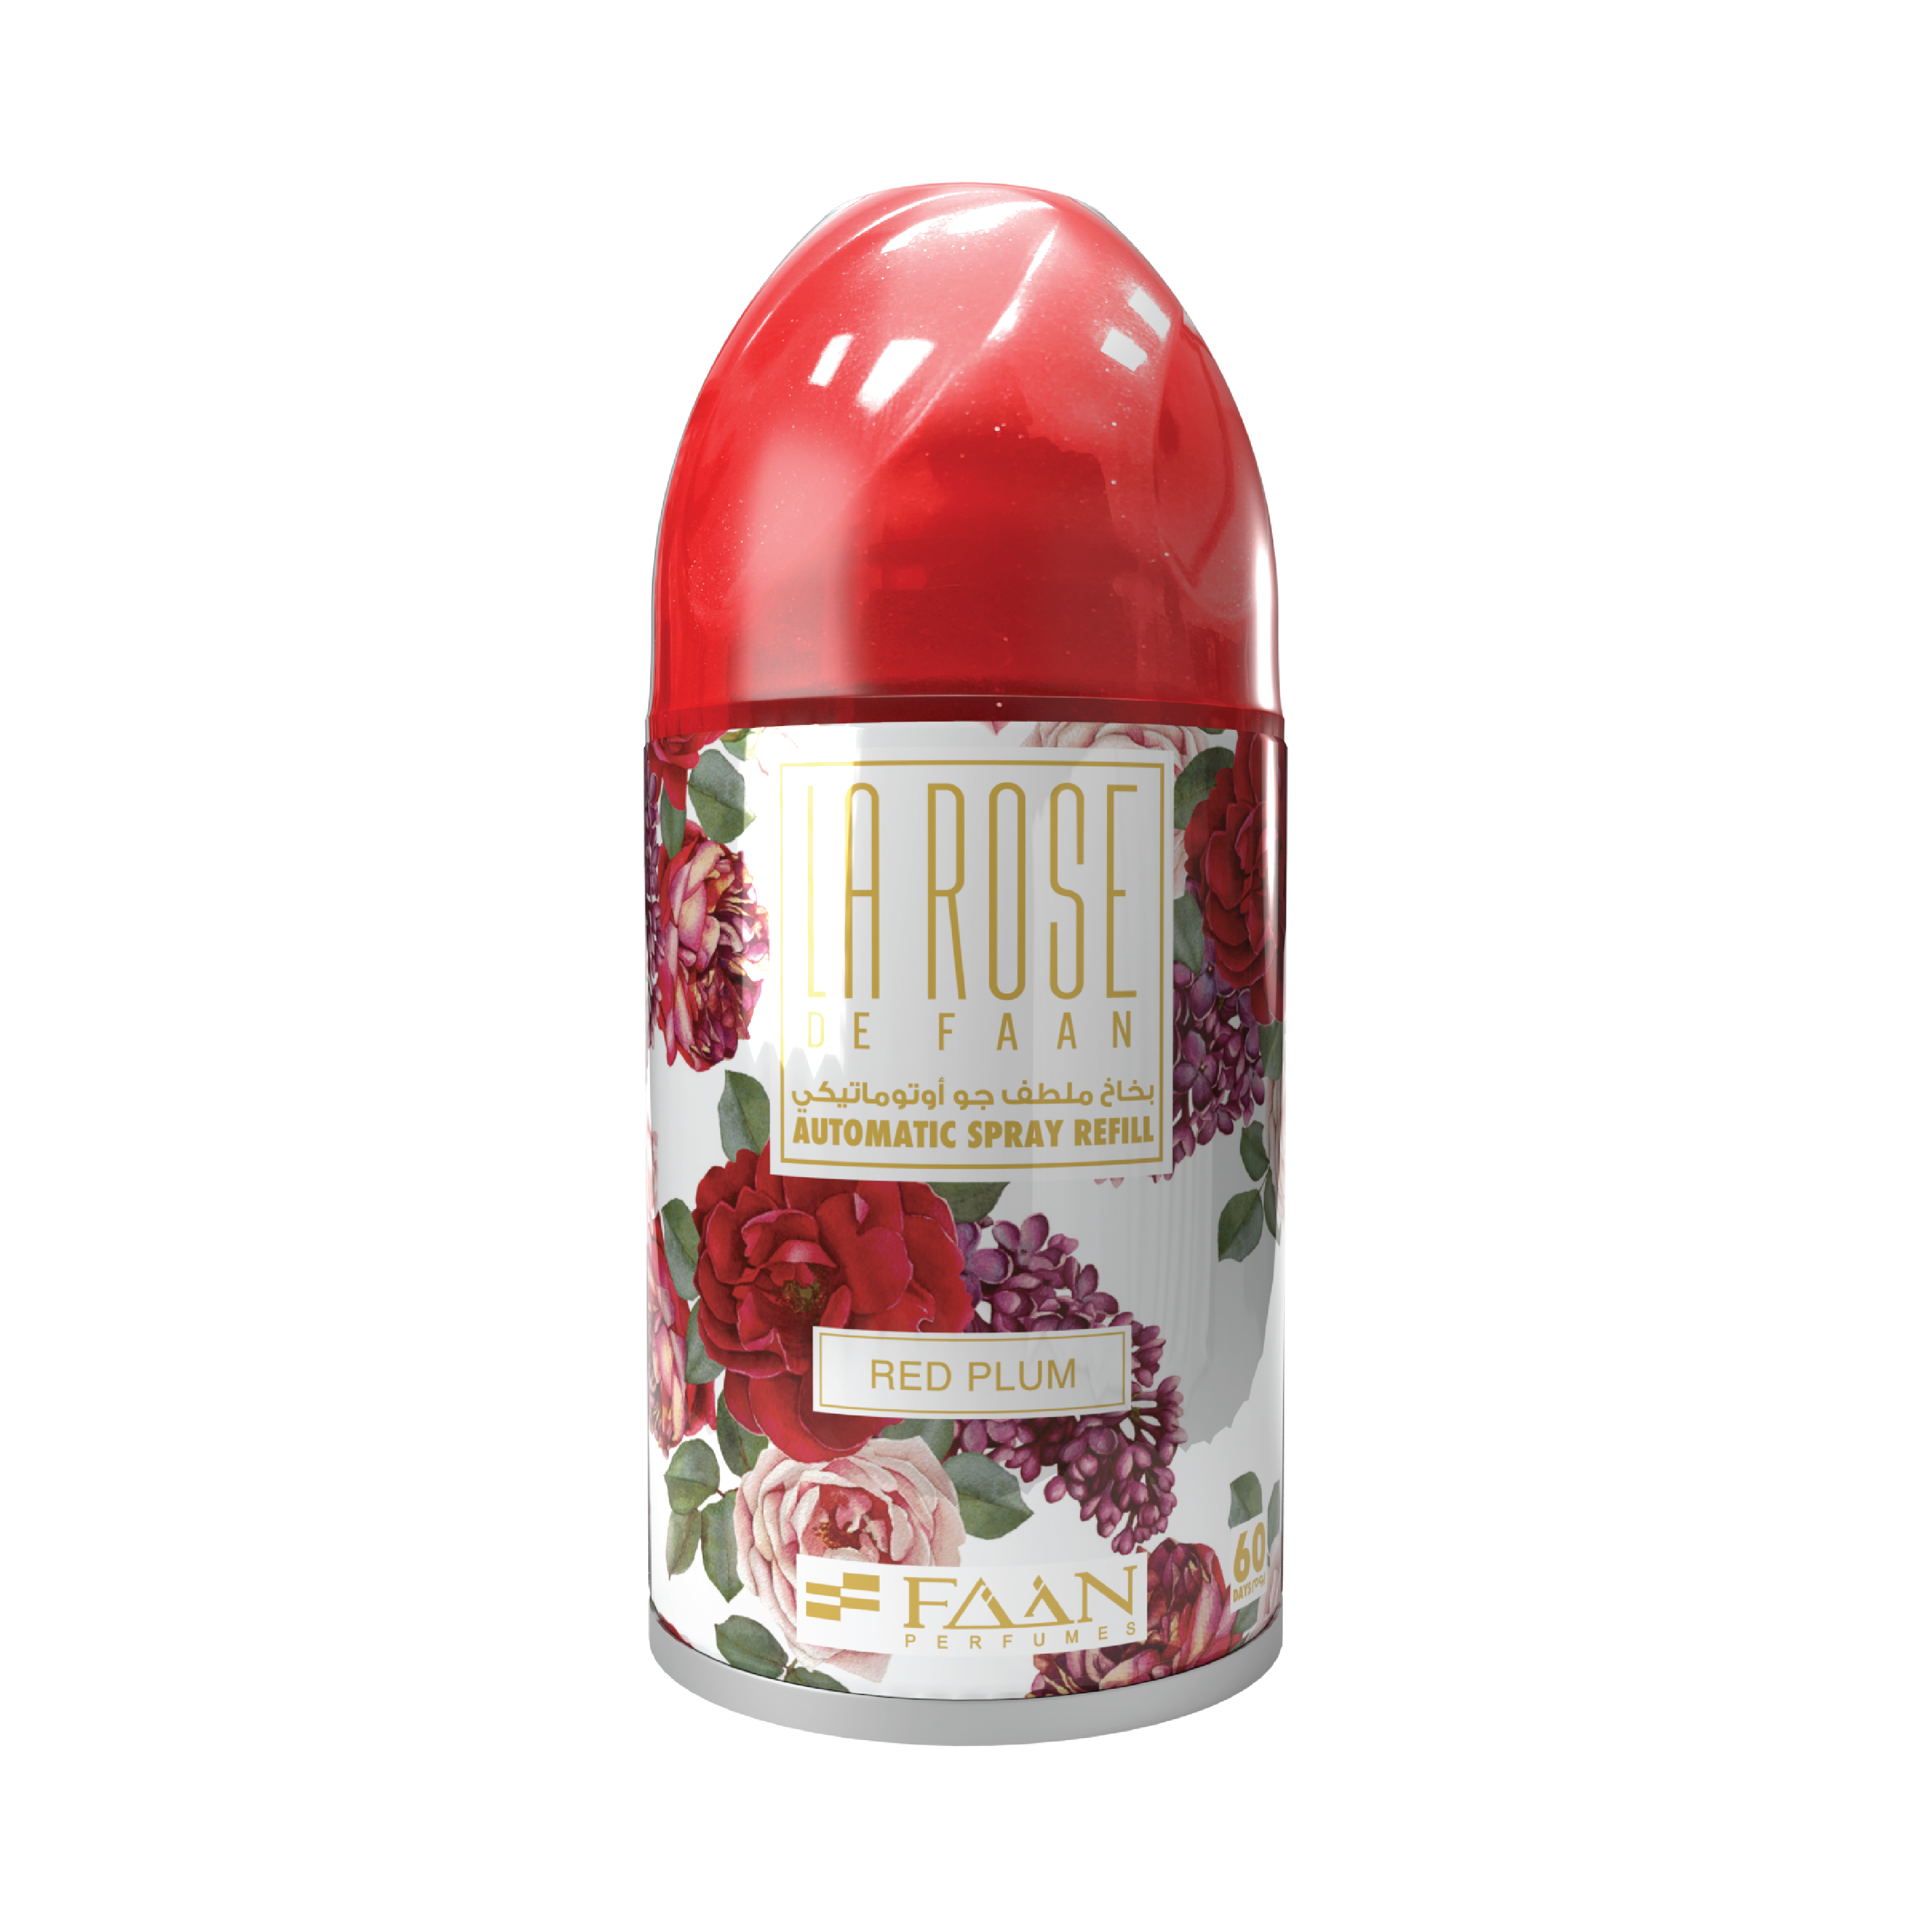 Delight in Luxury with La Rose Red Plum Automatic Spray Refill 250ml